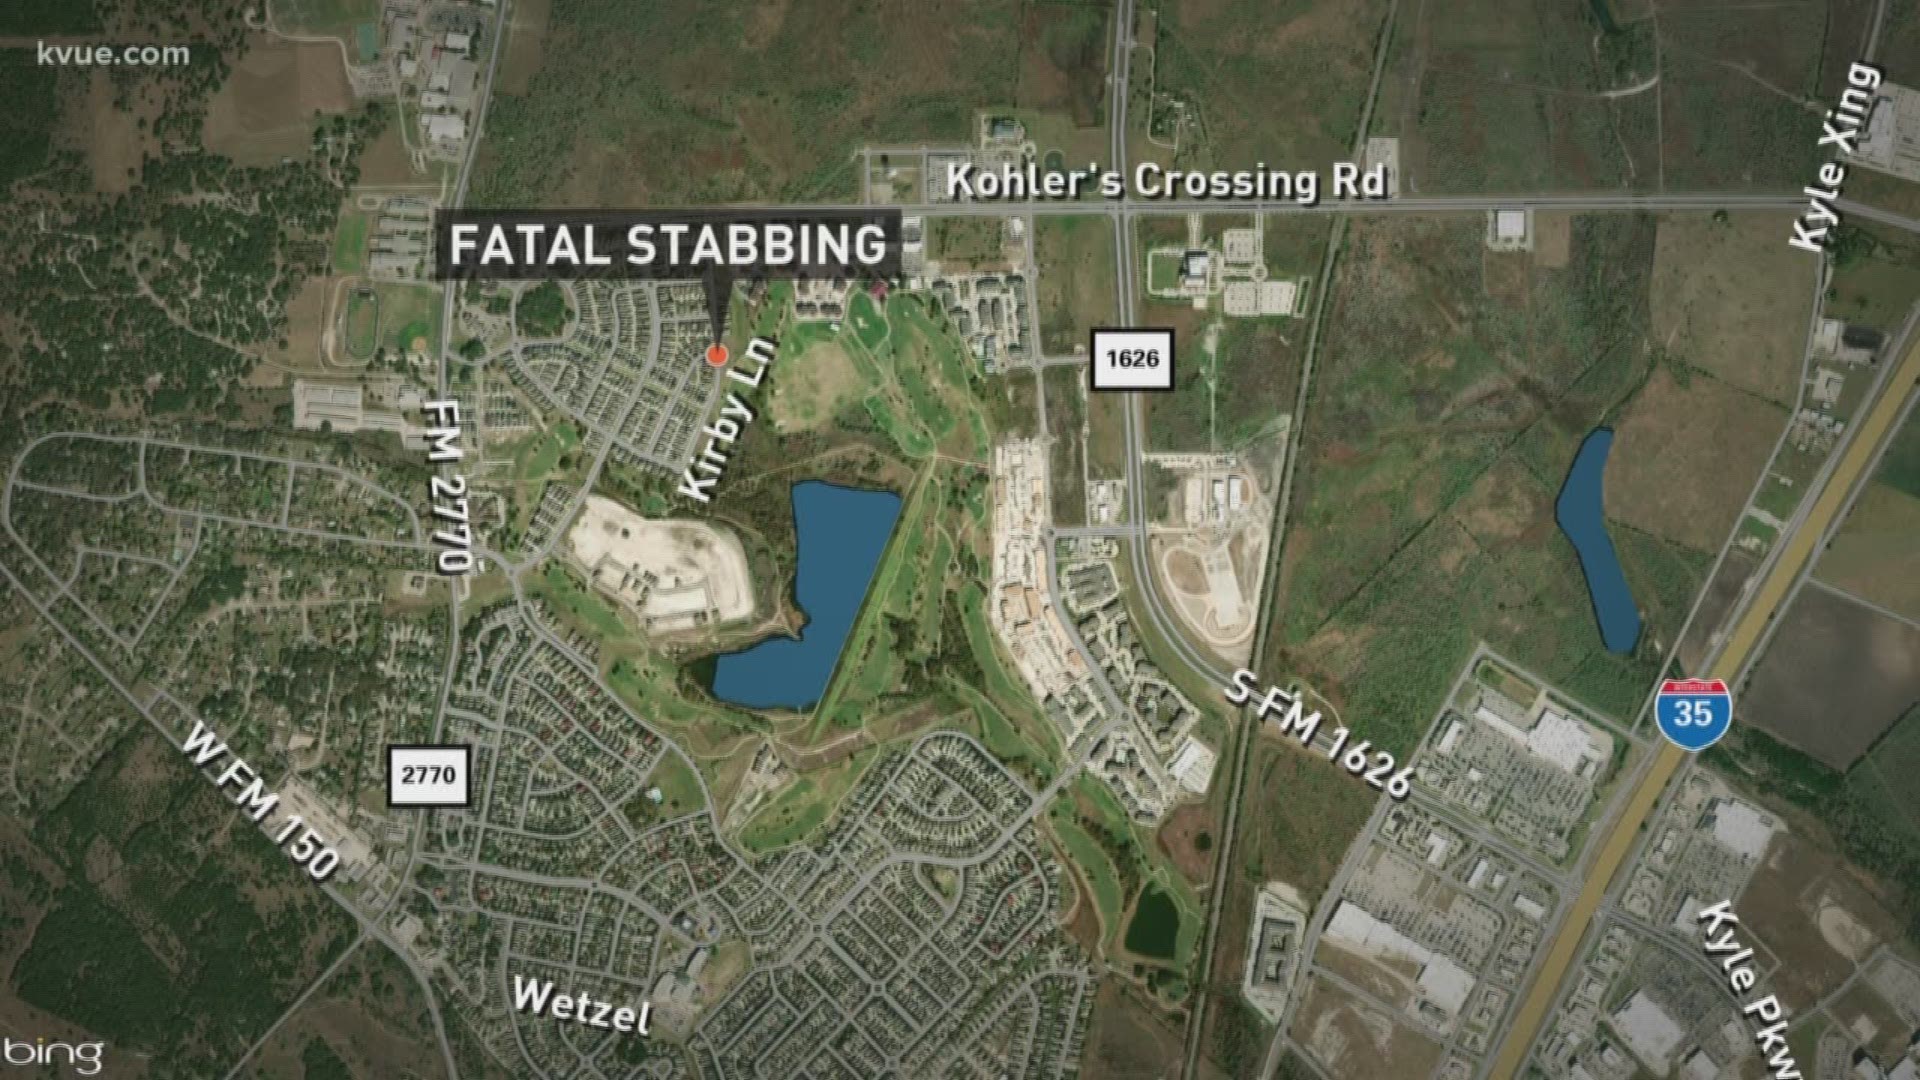 A man was stabbed to death in Kyle Saturday night.